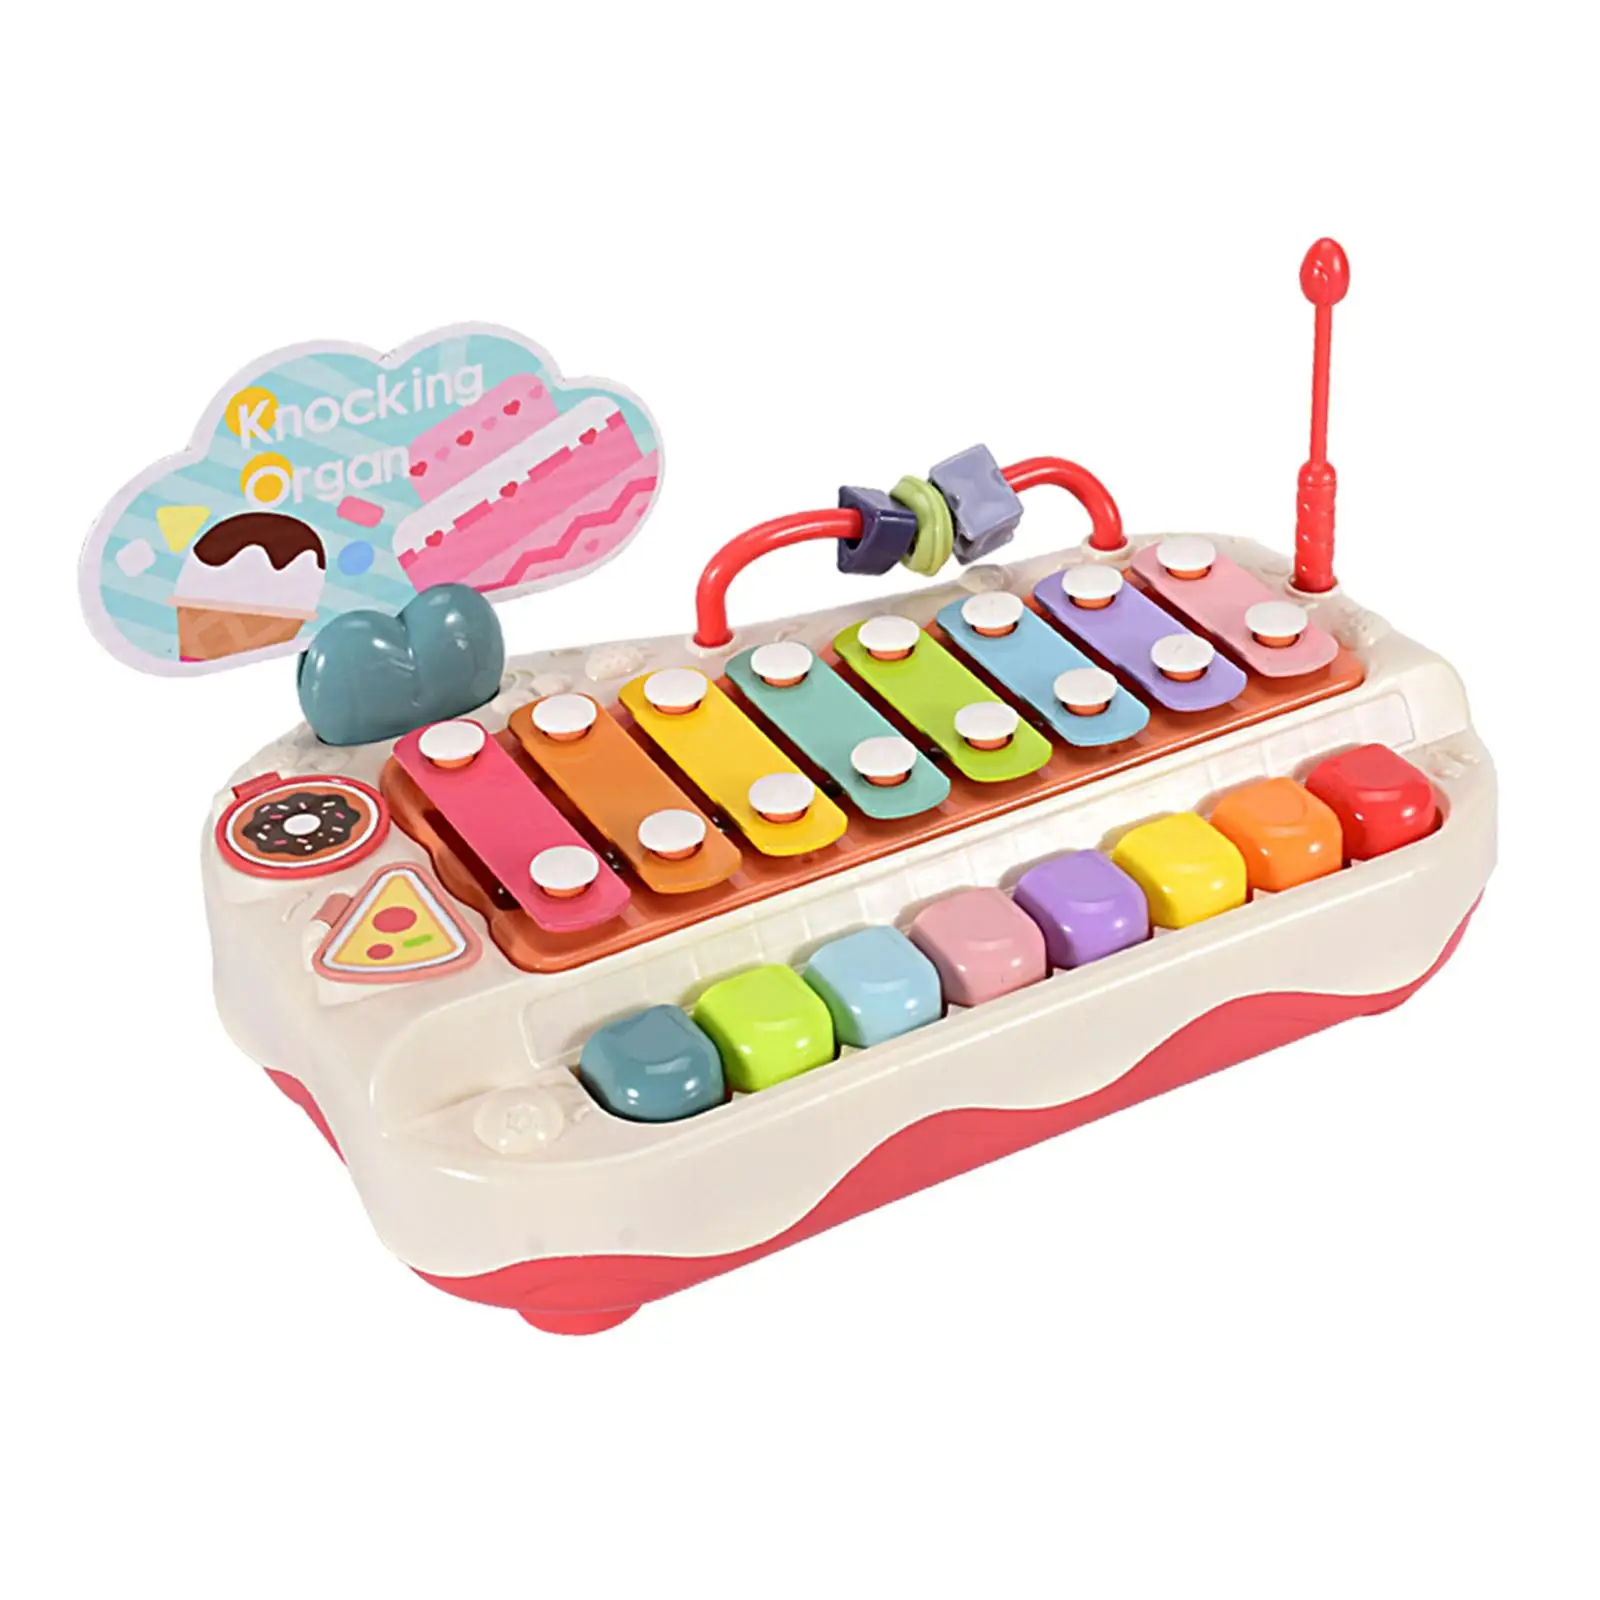 Kids Musical Toy Educational Montessori Learning Toy Musical Instrument Toy for Baby 1 2 3 Years Old Kids Toddler Birthday Gift